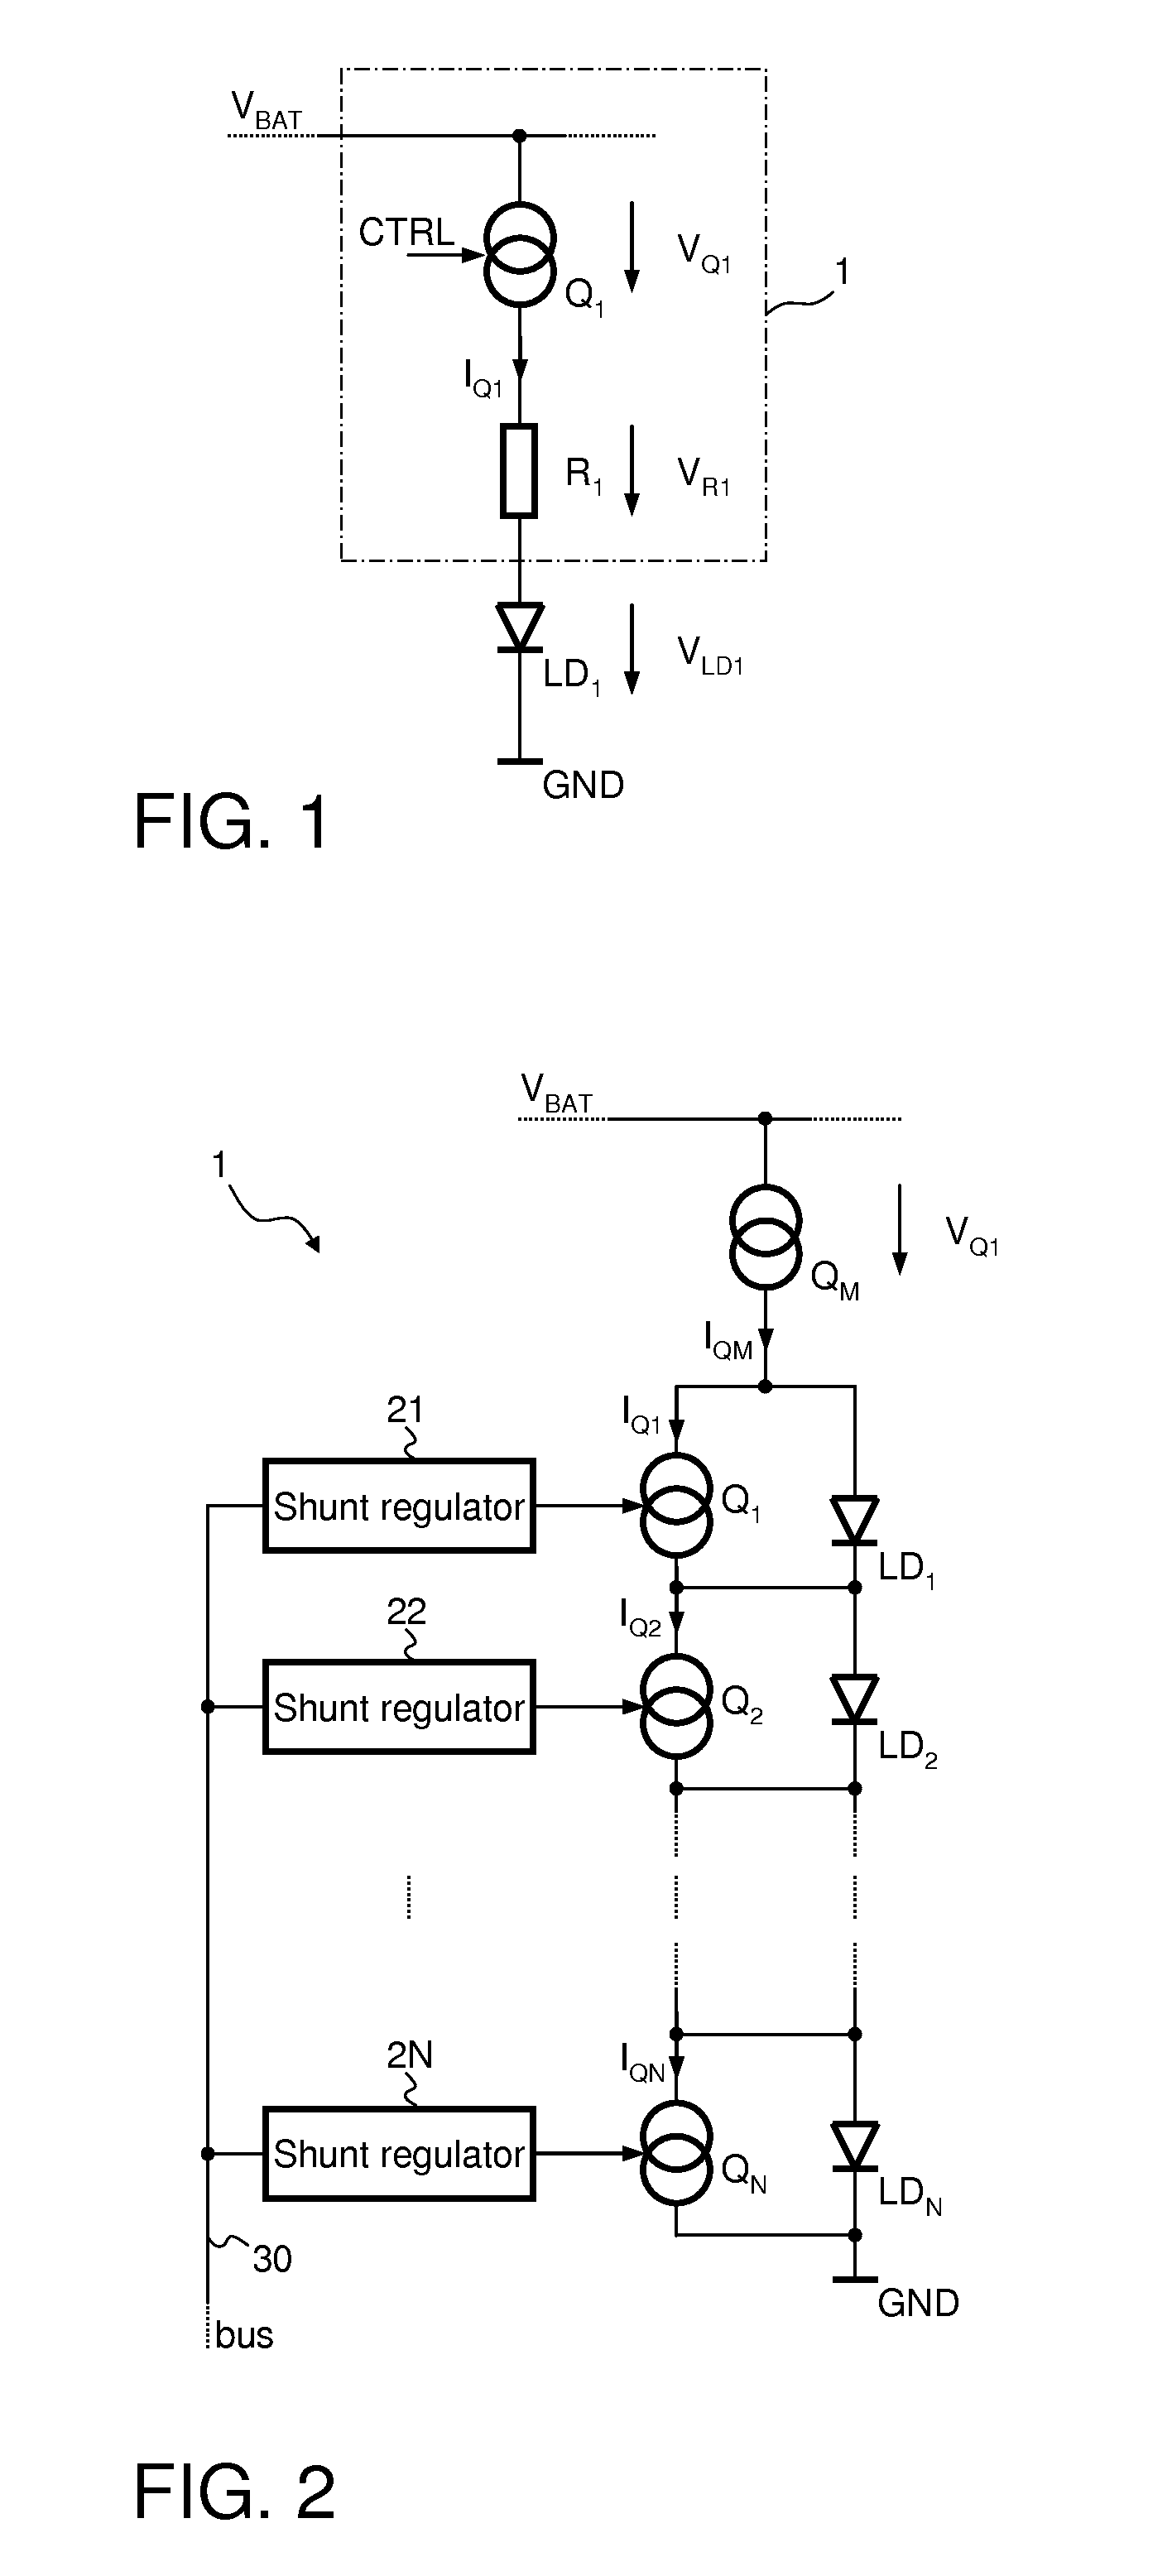 Driver Circuit for Efficiently Driving a Large Number of LEDs